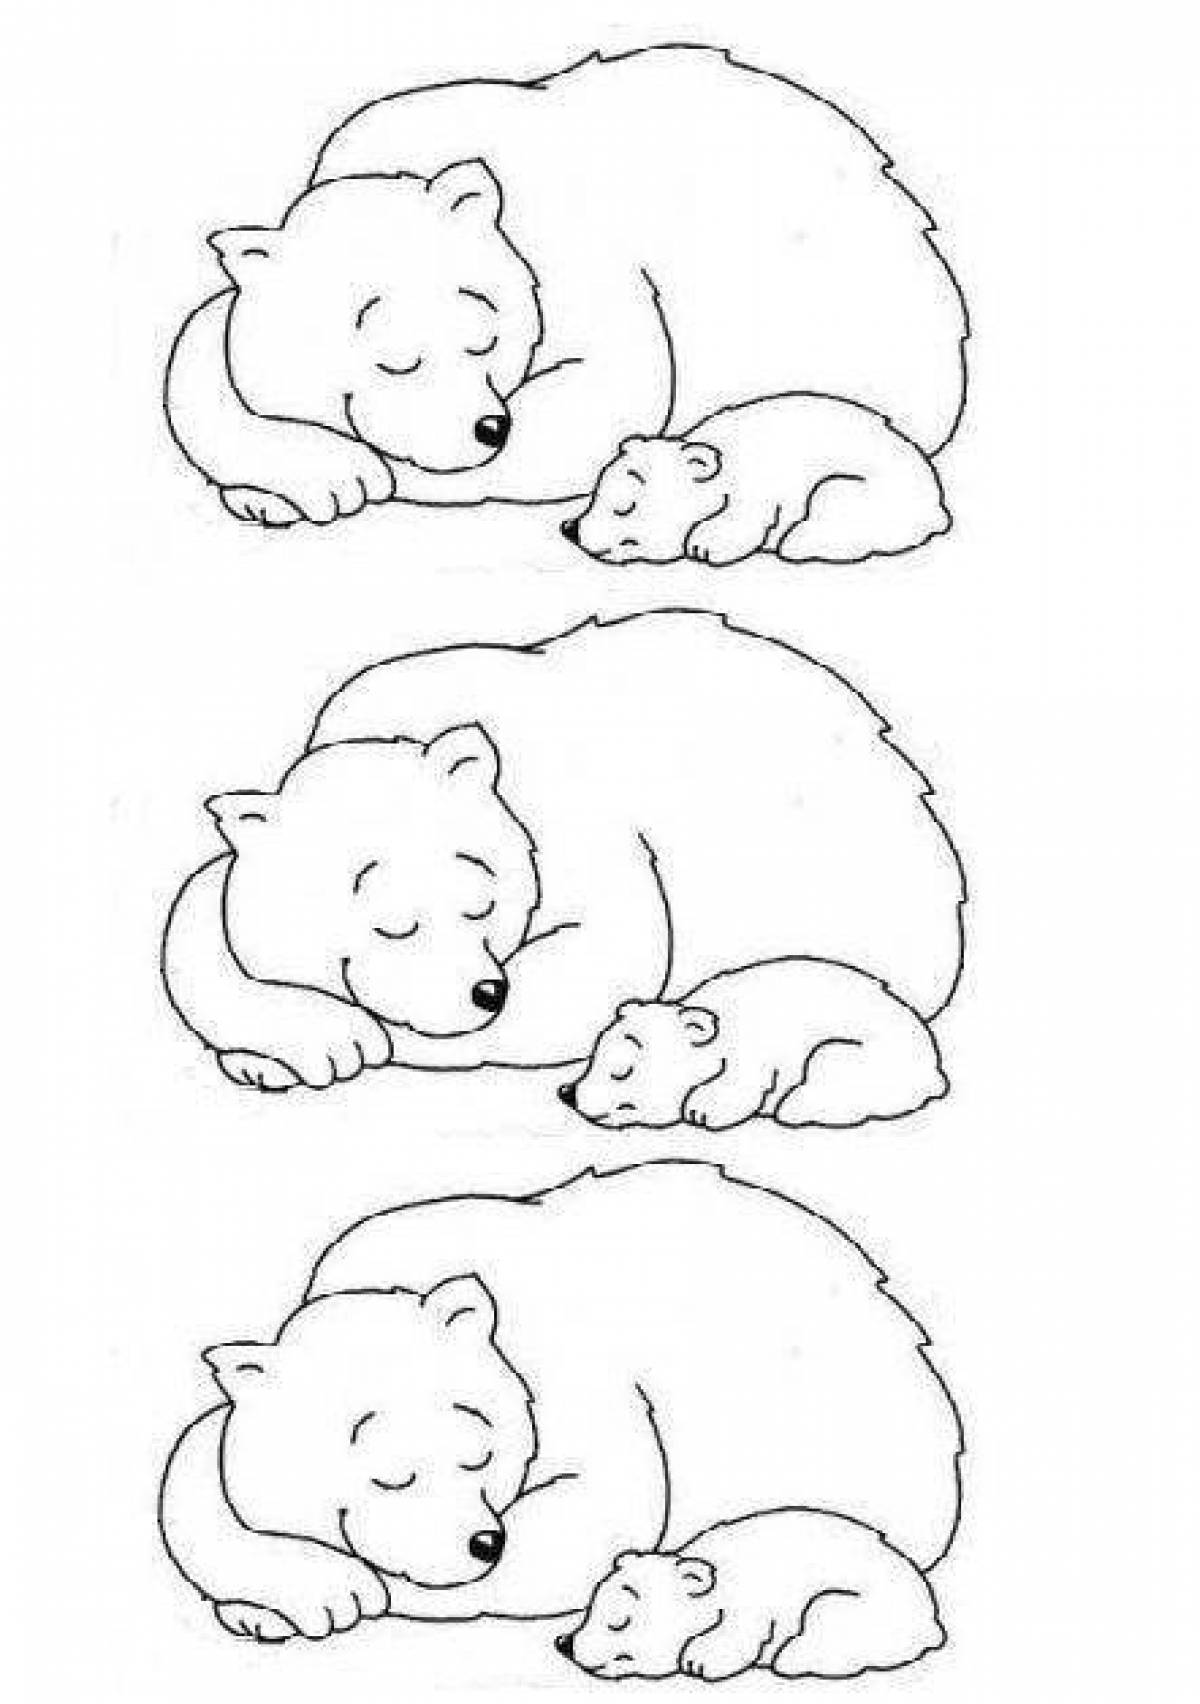 Snuggly coloring page sleeping bear